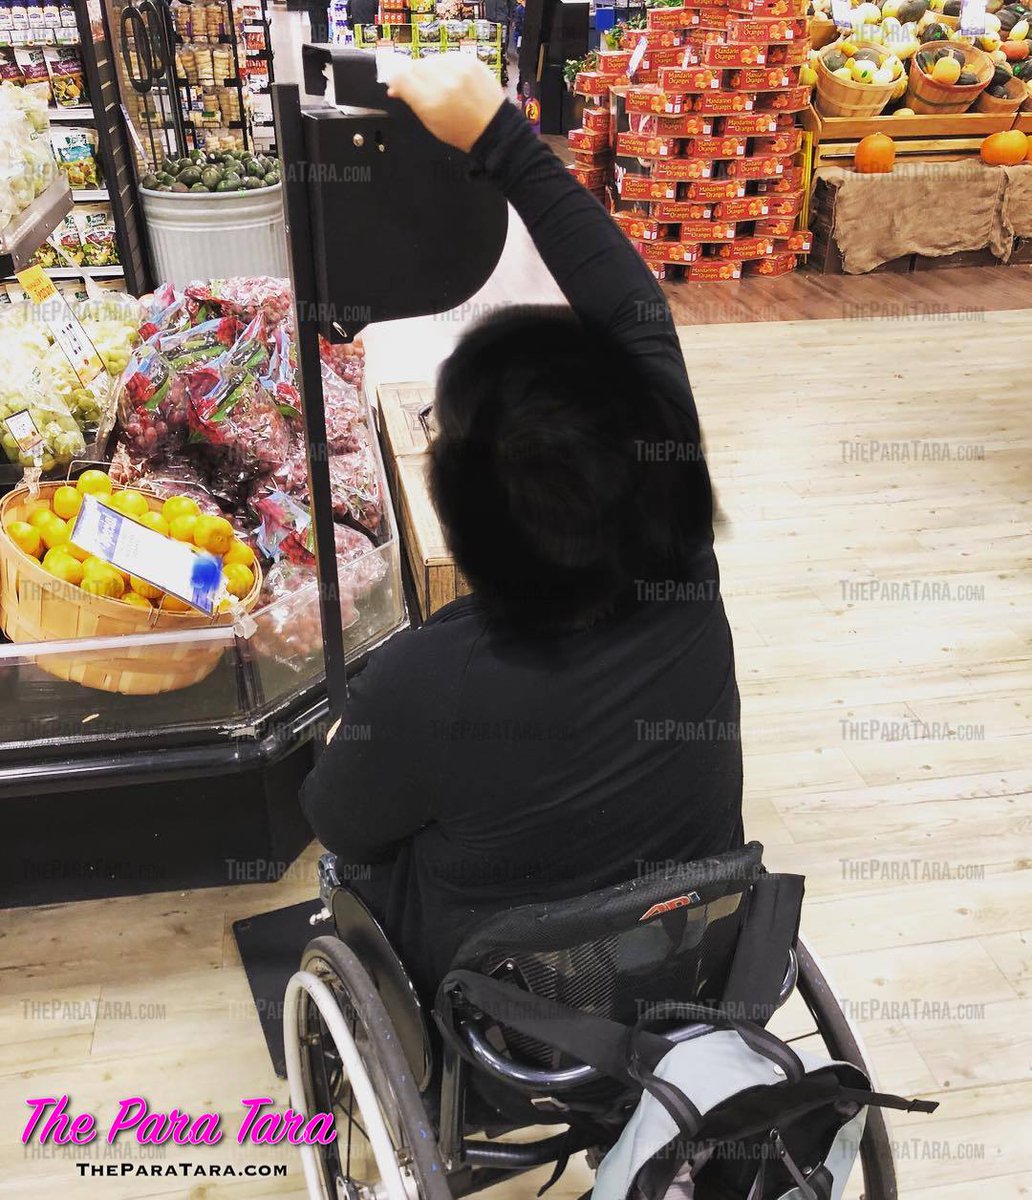 Like, really, even just two inches lower would help us.

#wheelchair,#wheelchairgirl,#disabledmodel,#paraplegic,#disabledbutcute,#disabledandcute,#disabledgirl,#disabledwoman